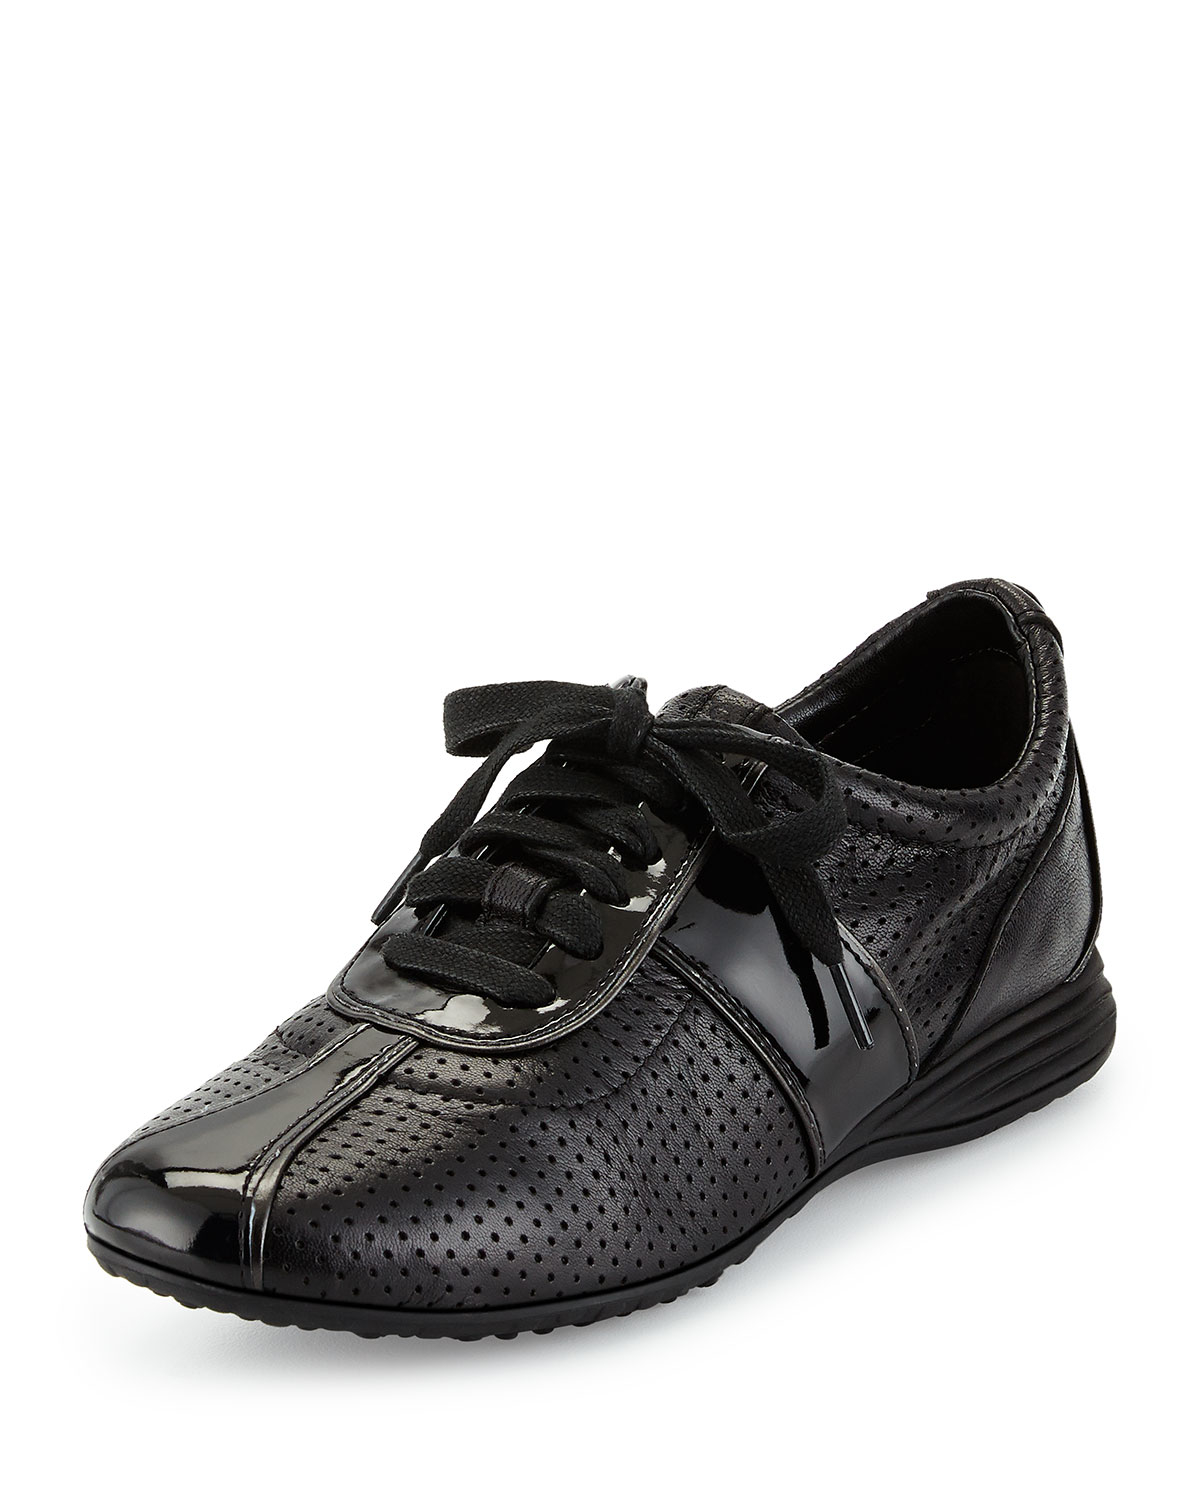 Cole haan Bria Perforated Leather Sneaker in Black (BLACK PERF) - Save ...